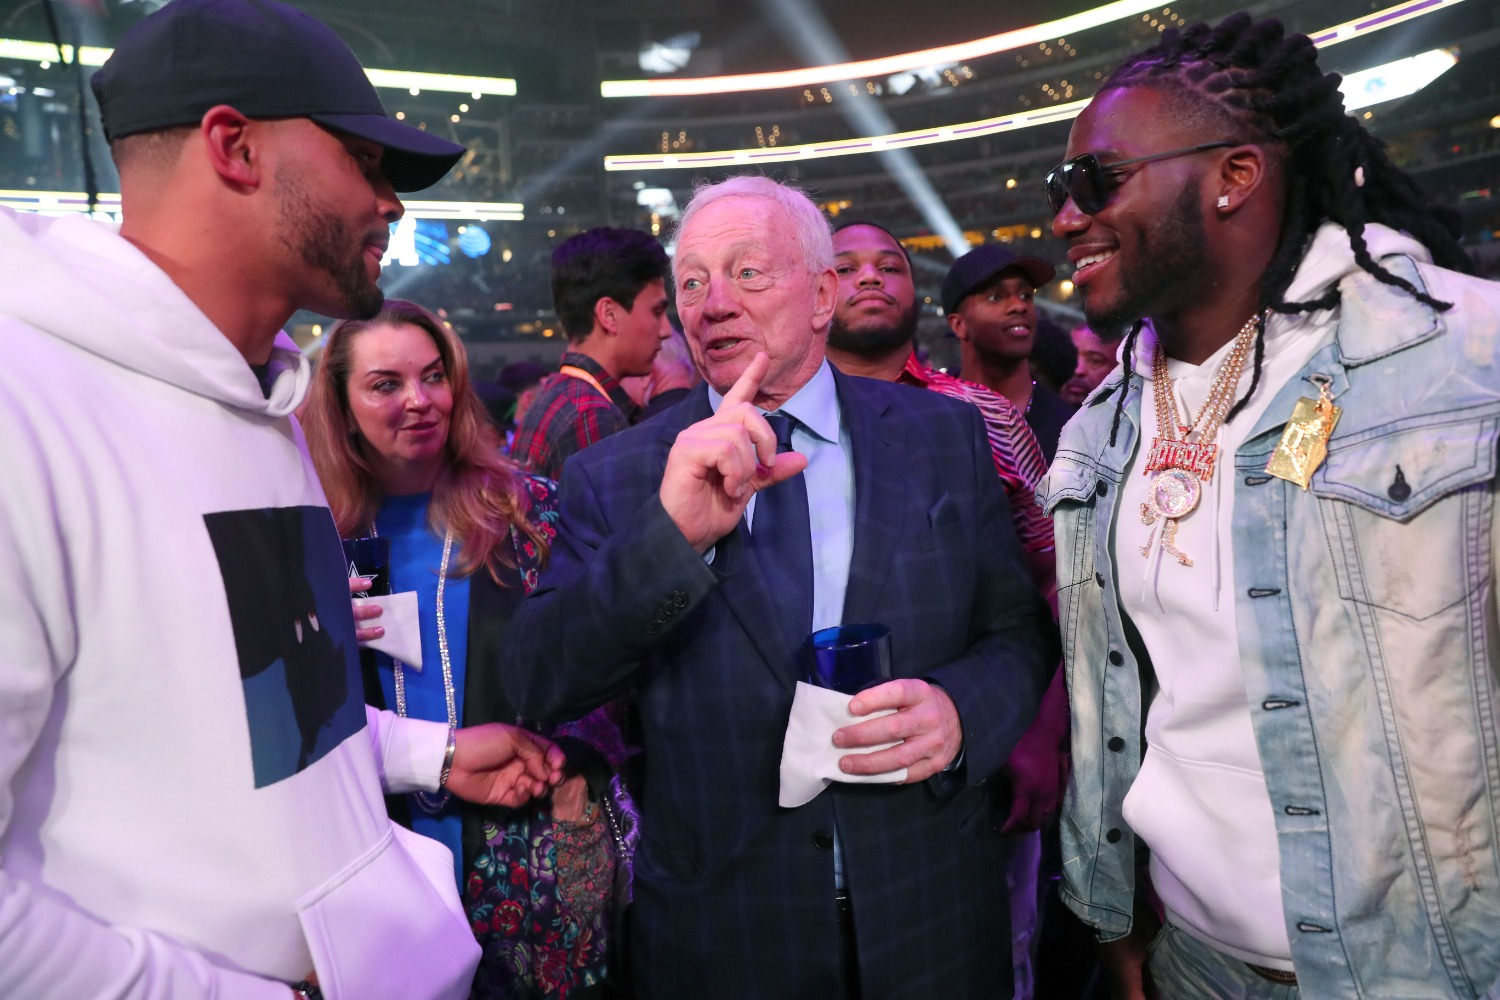 Jerry Jones and Dak Prescott have little time left to work out a long-term deal to ensure Prescott remains the quarterback of the Dallas Cowboys for years to come.